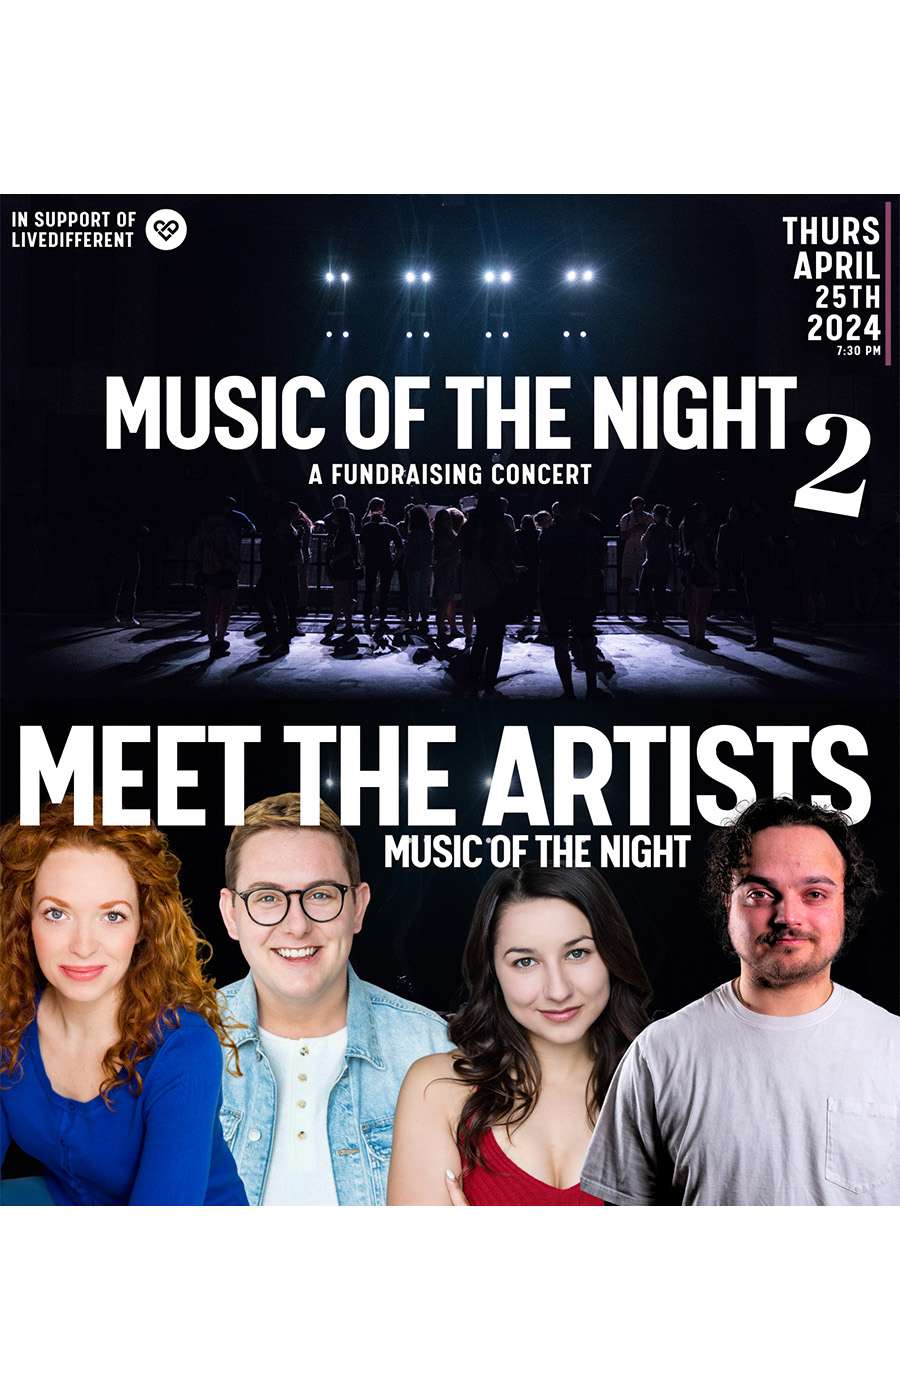 Music of the Night 2 - A Fundraising Concert